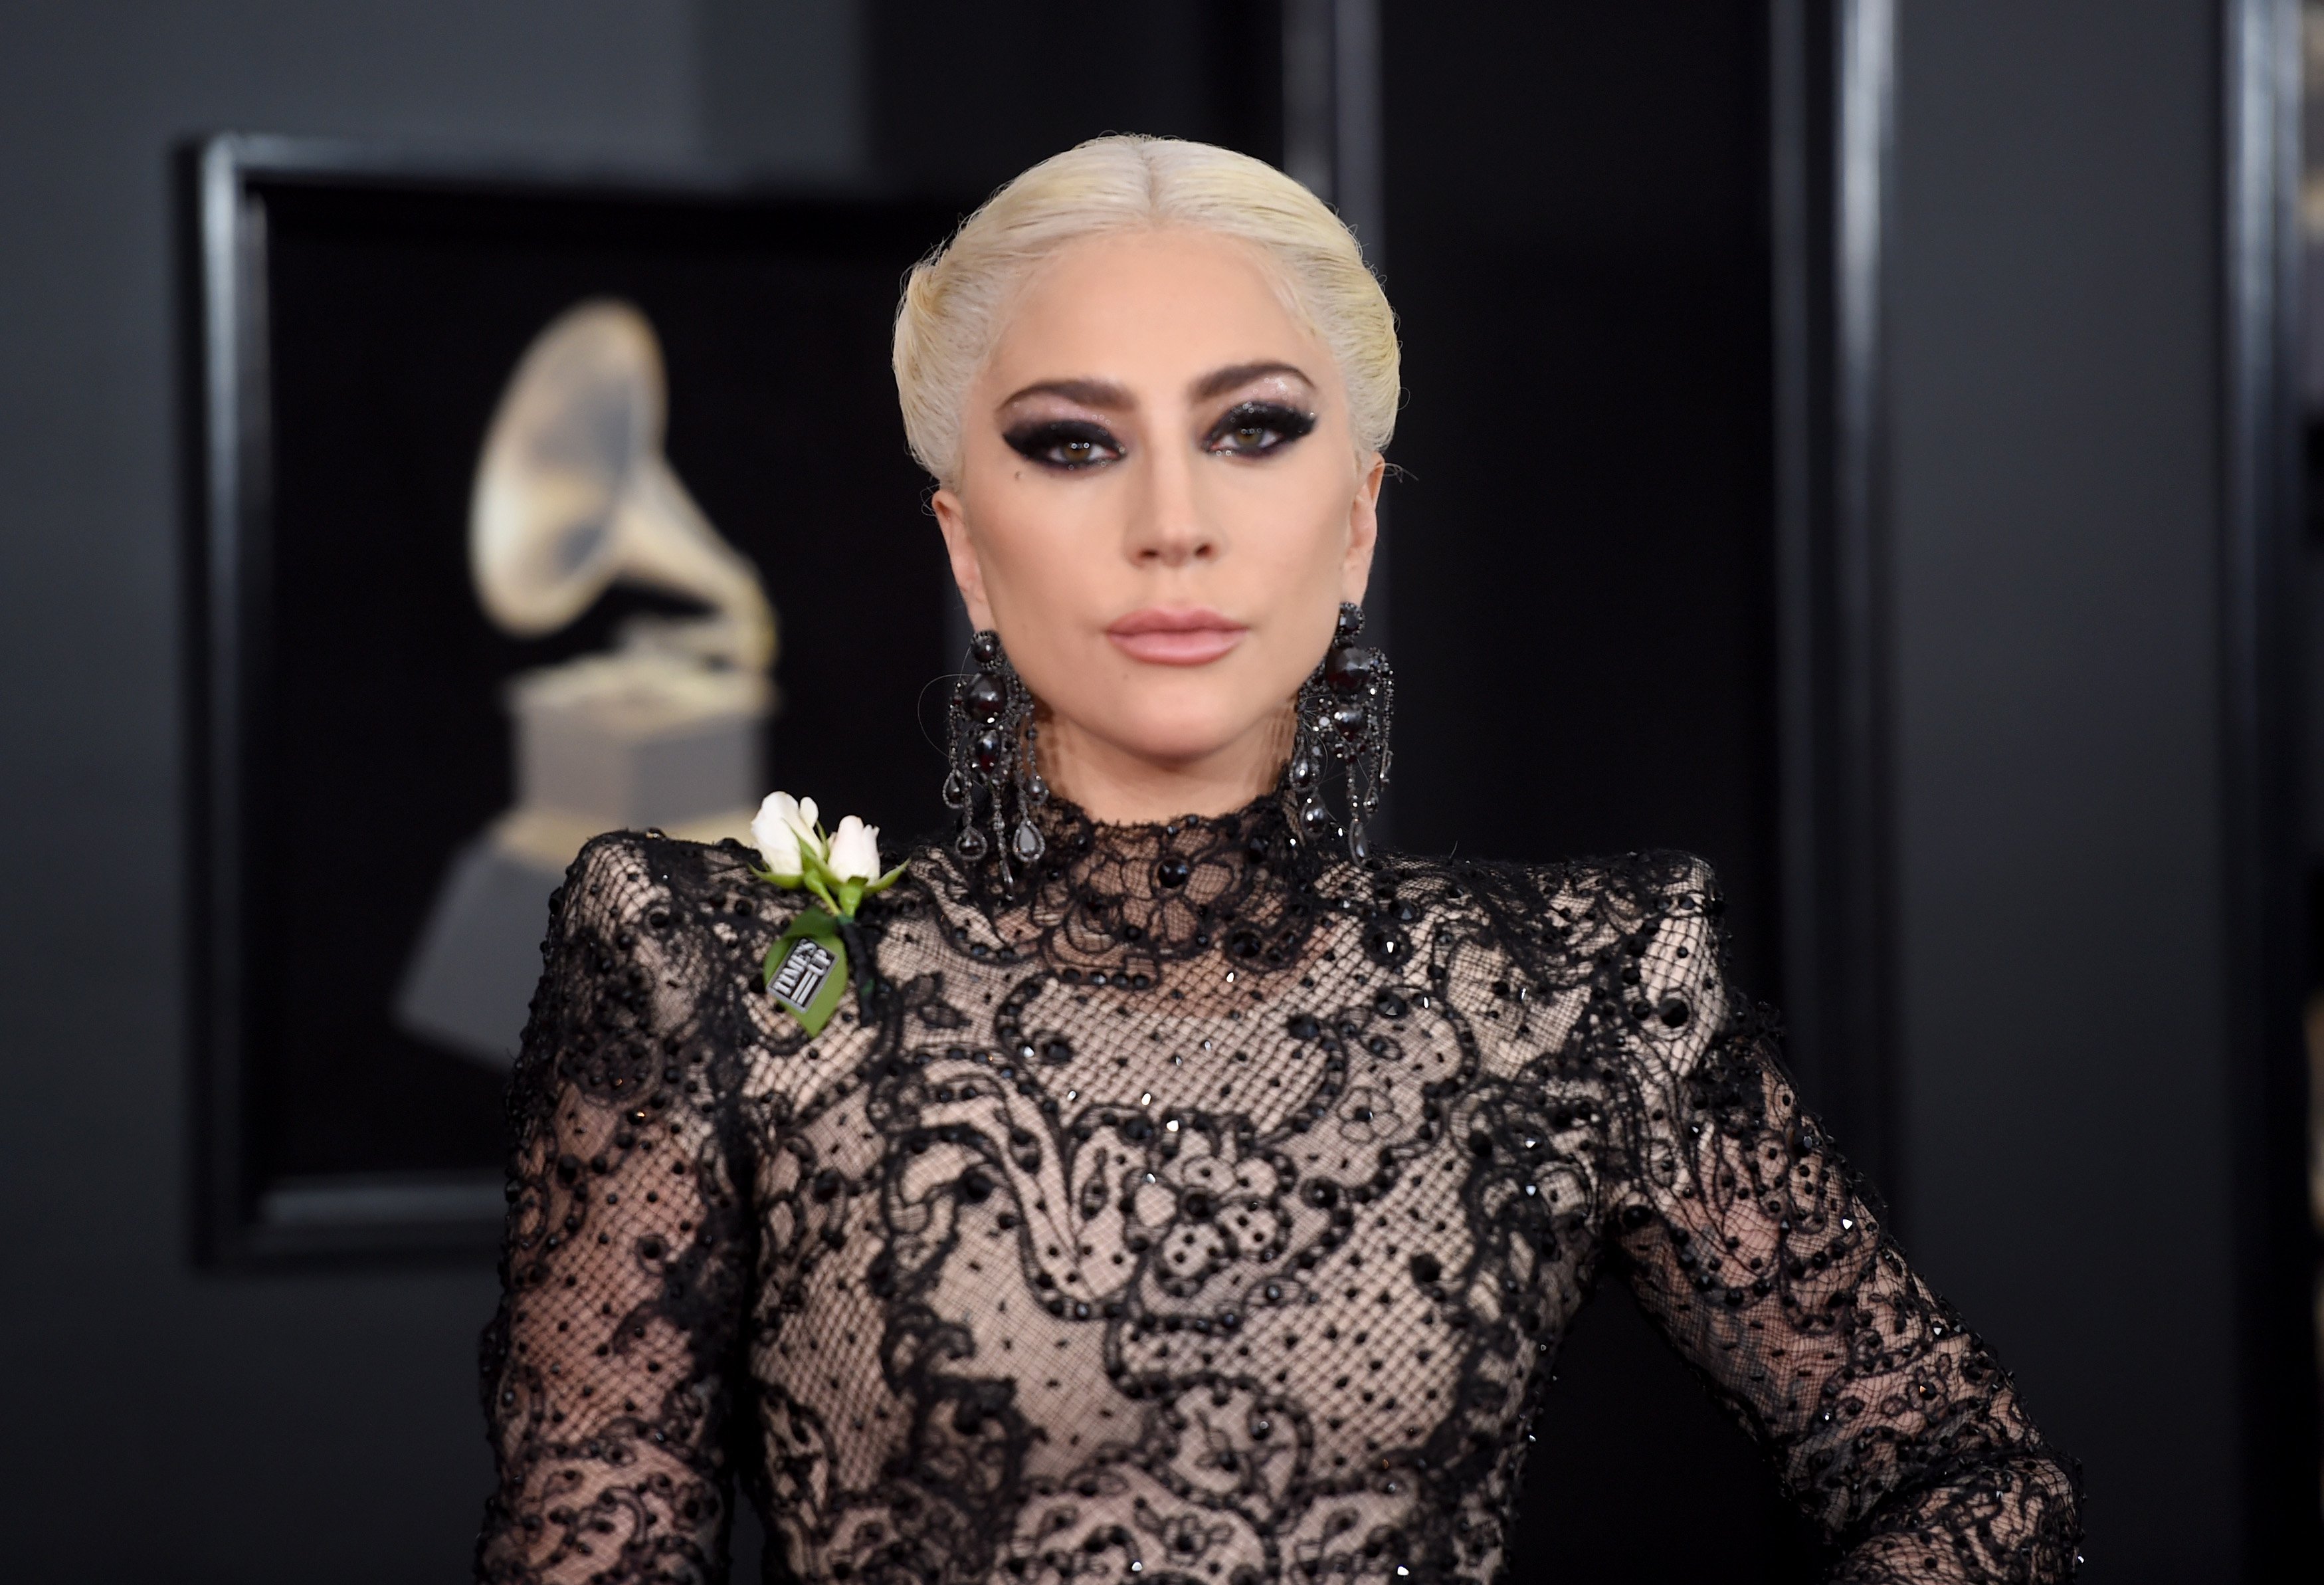 Lady Gaga attends the 60th Annual GRAMMY Awards at Madison Square Garden